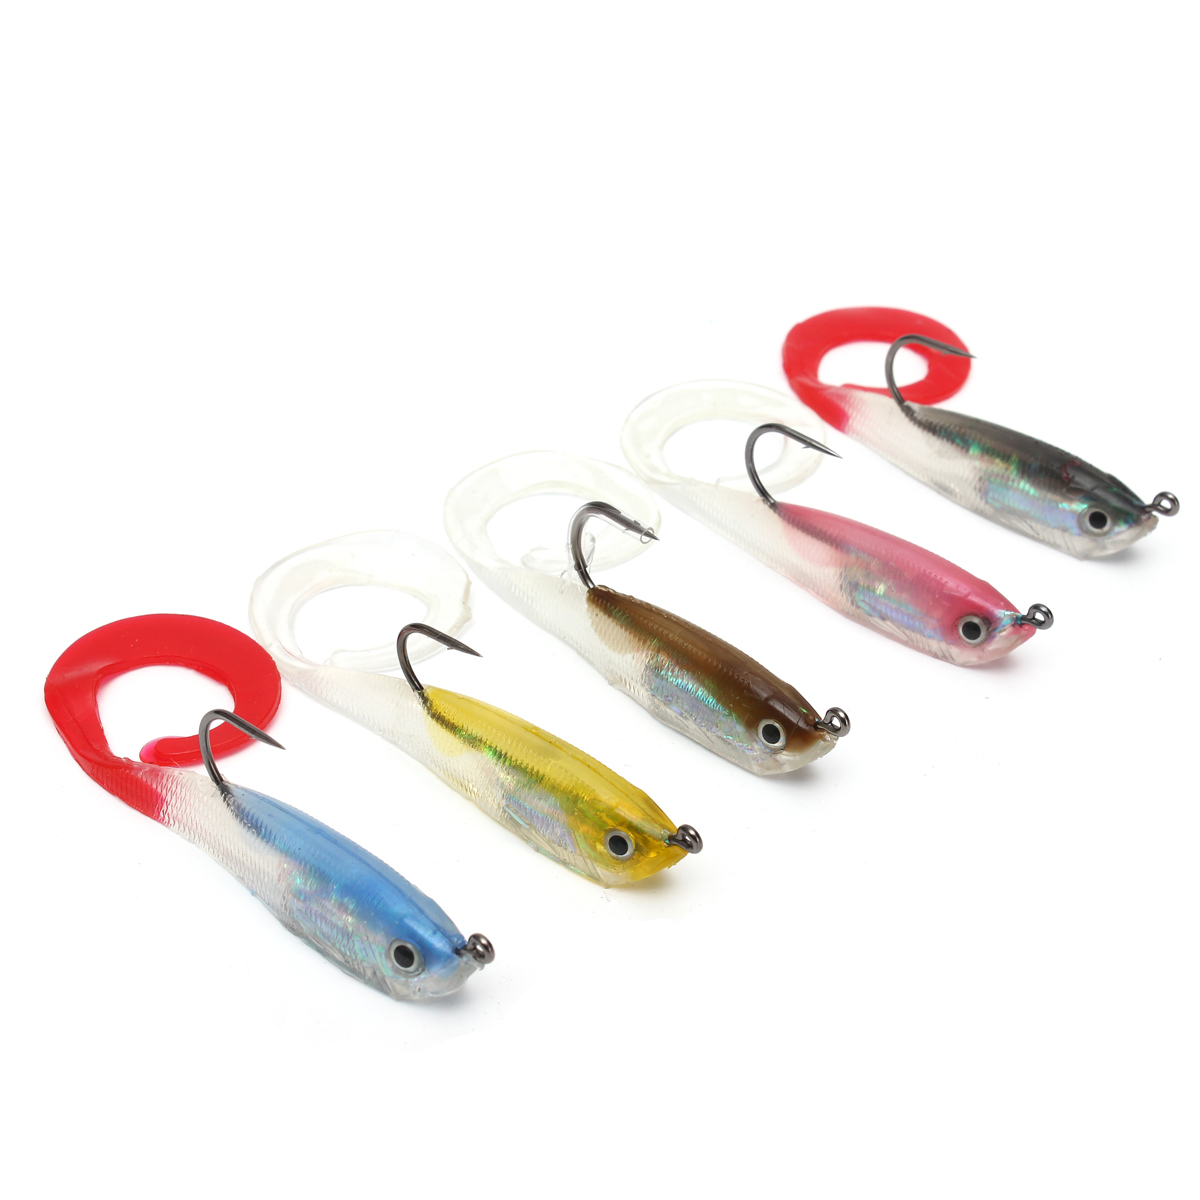 

ZANLURE 5pcs Jigging Lead Soft Fishing Lures Minnow Bait Tackle Mixed Colors Single Hook